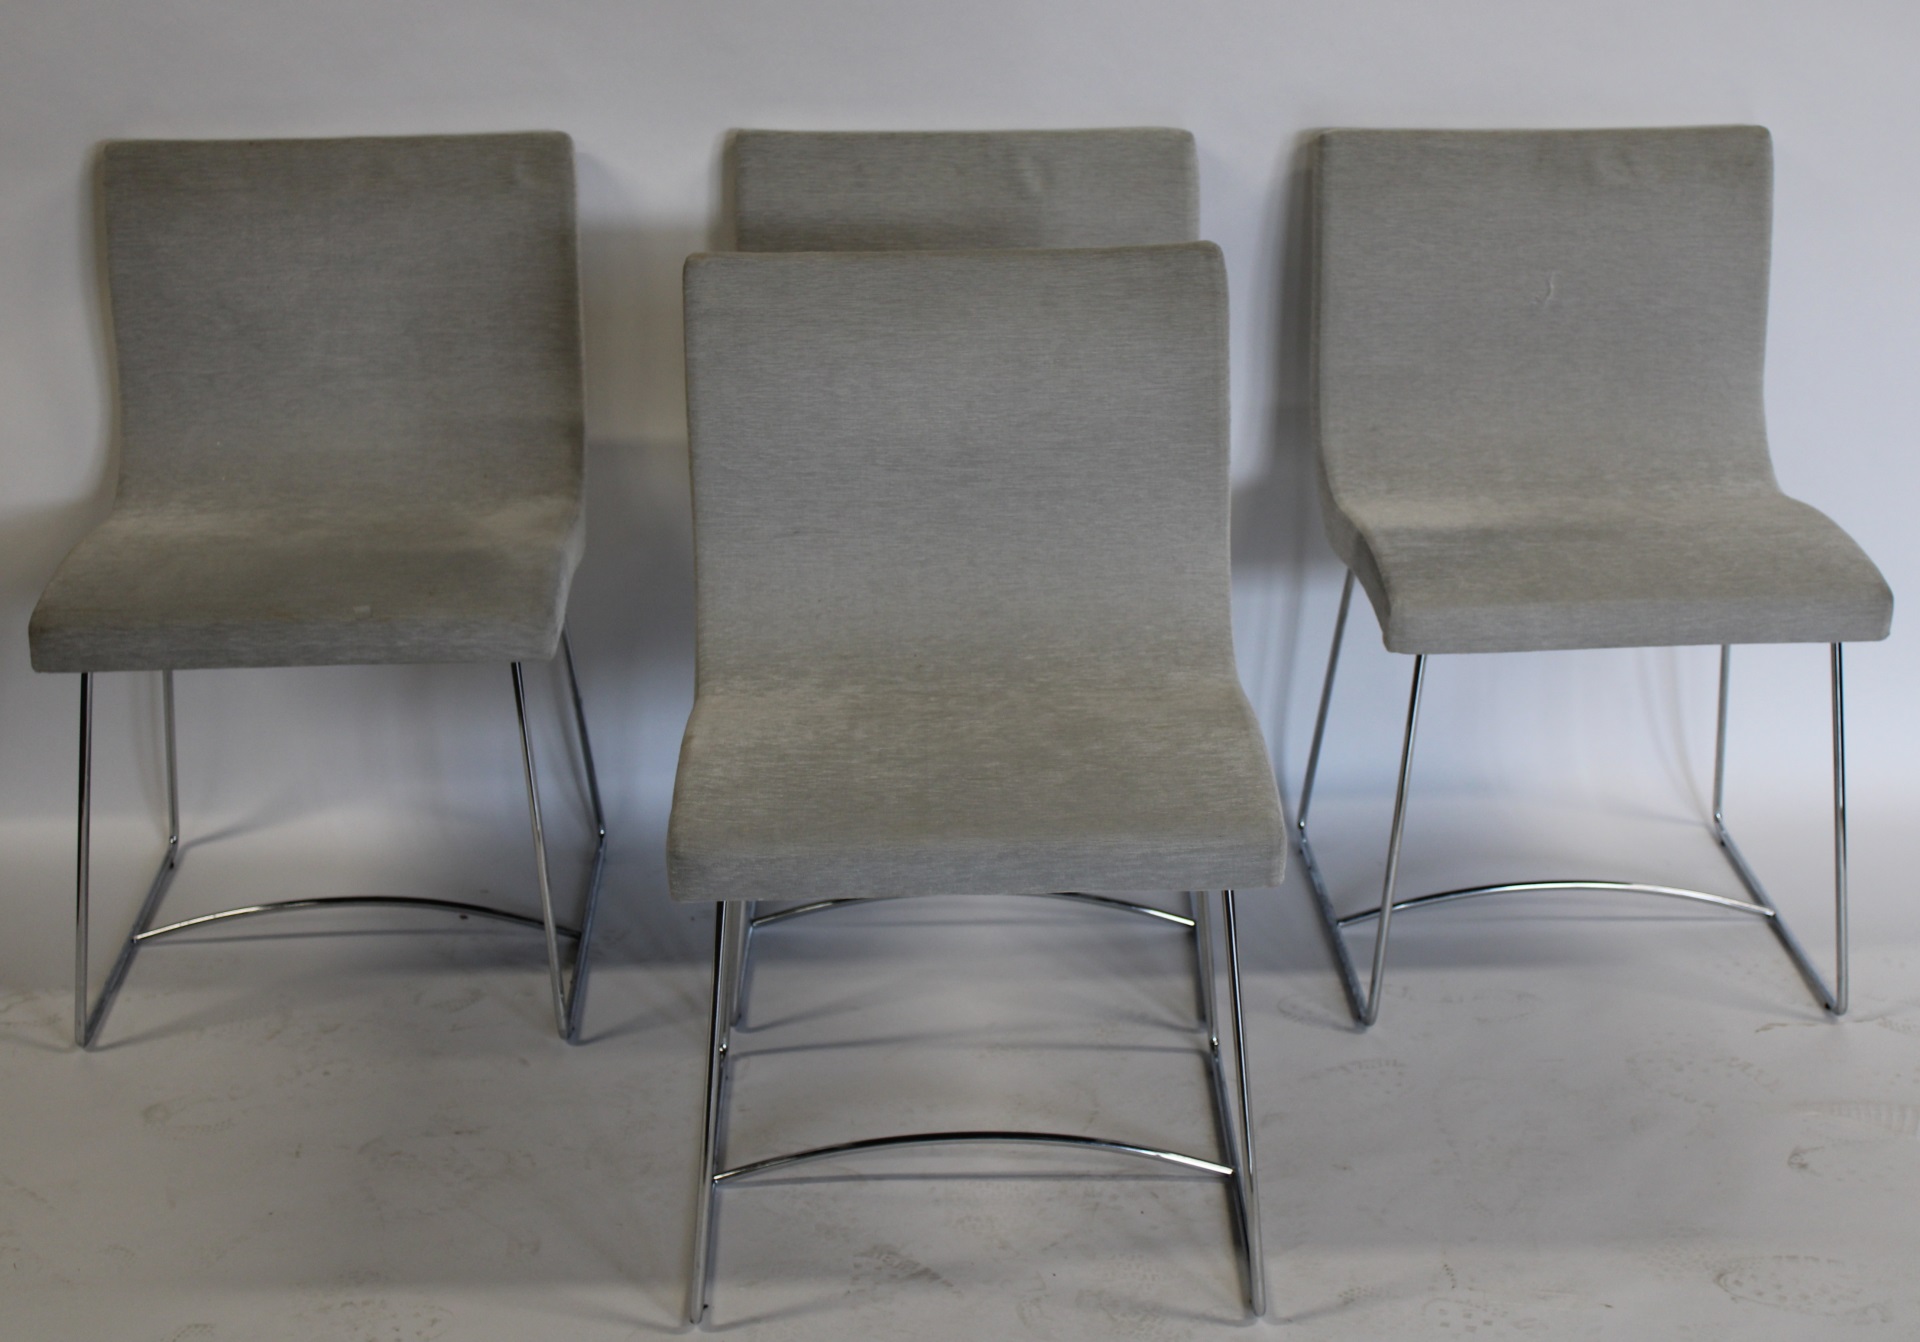 4 LIGNE ROSET CHAIRS & A SUEDE